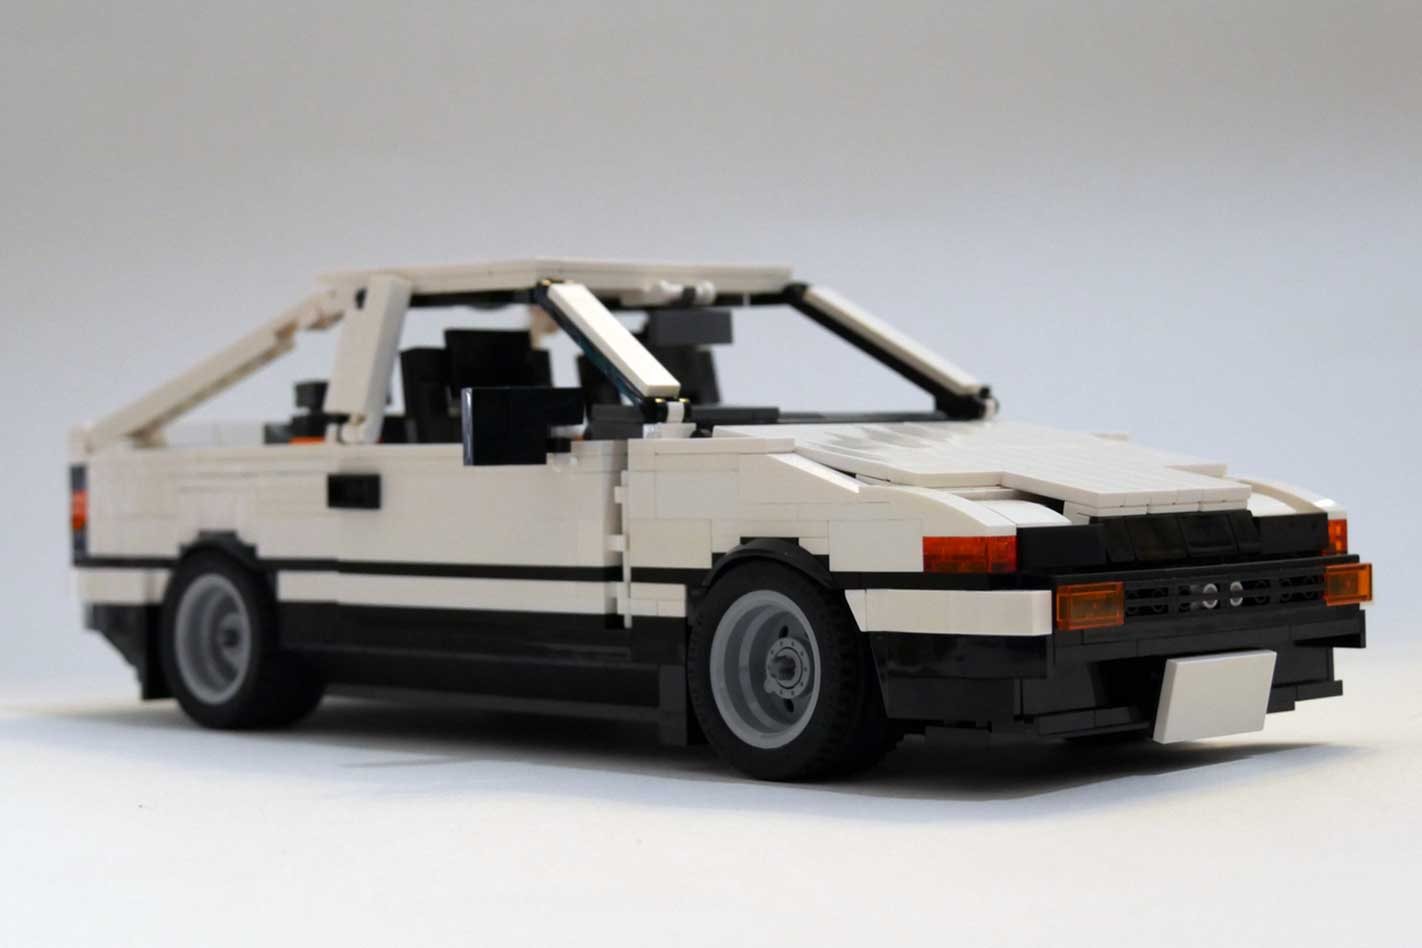 Lego Toyota AE86 could a real product